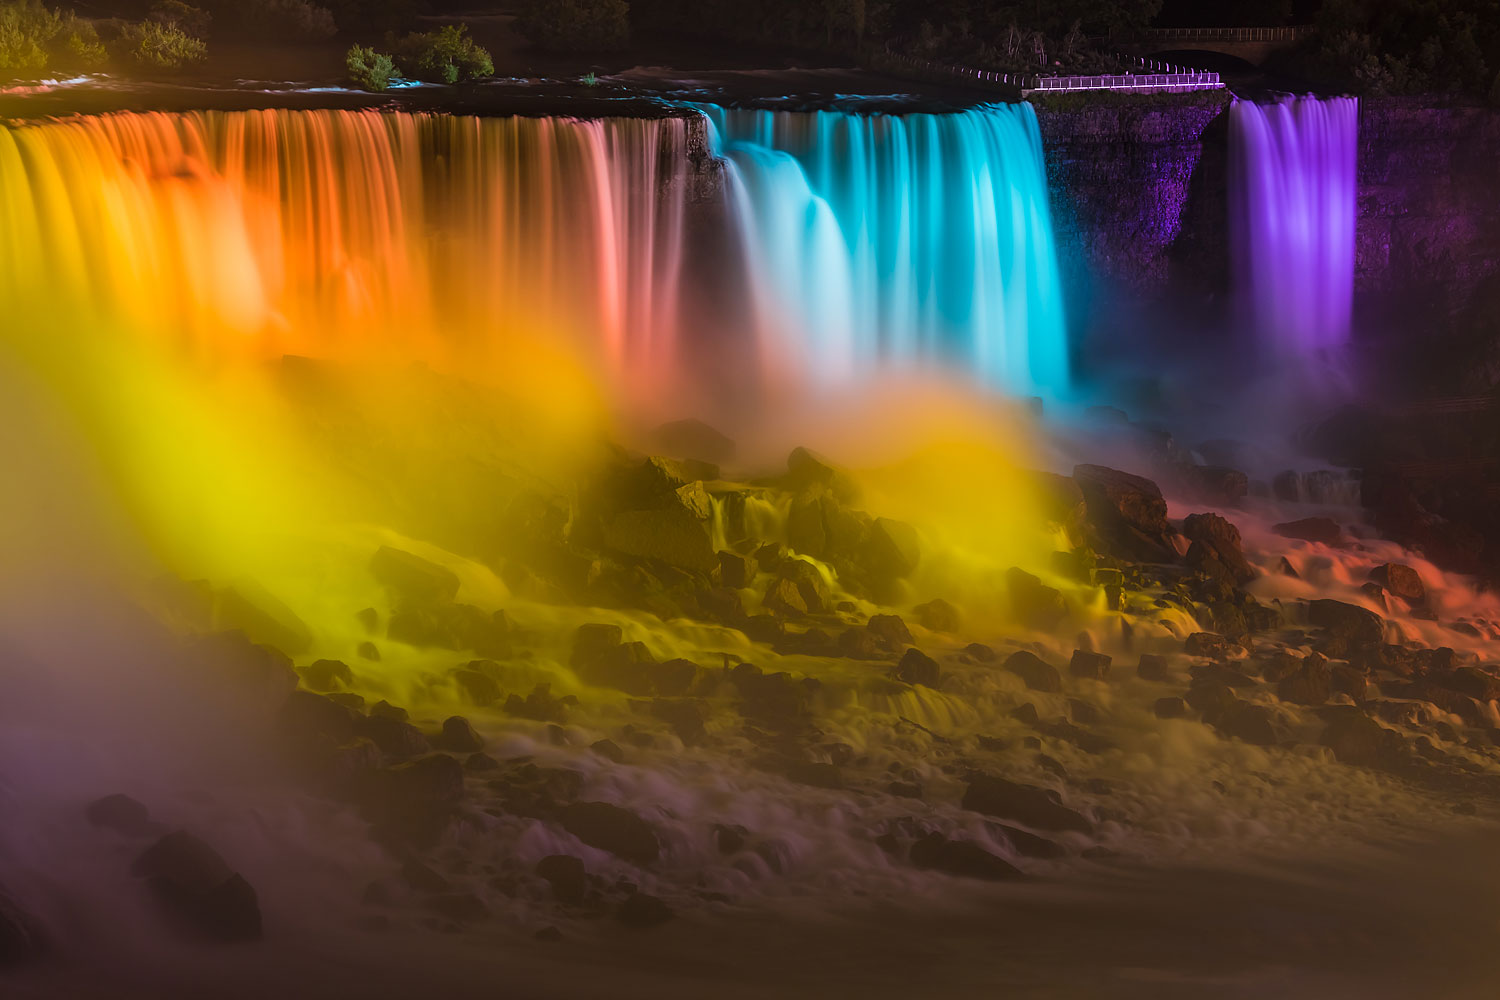 Niagara Falls - Illuminated American Falls and Bridal Veil Falls as Seen from the Canadian Side in the Evening